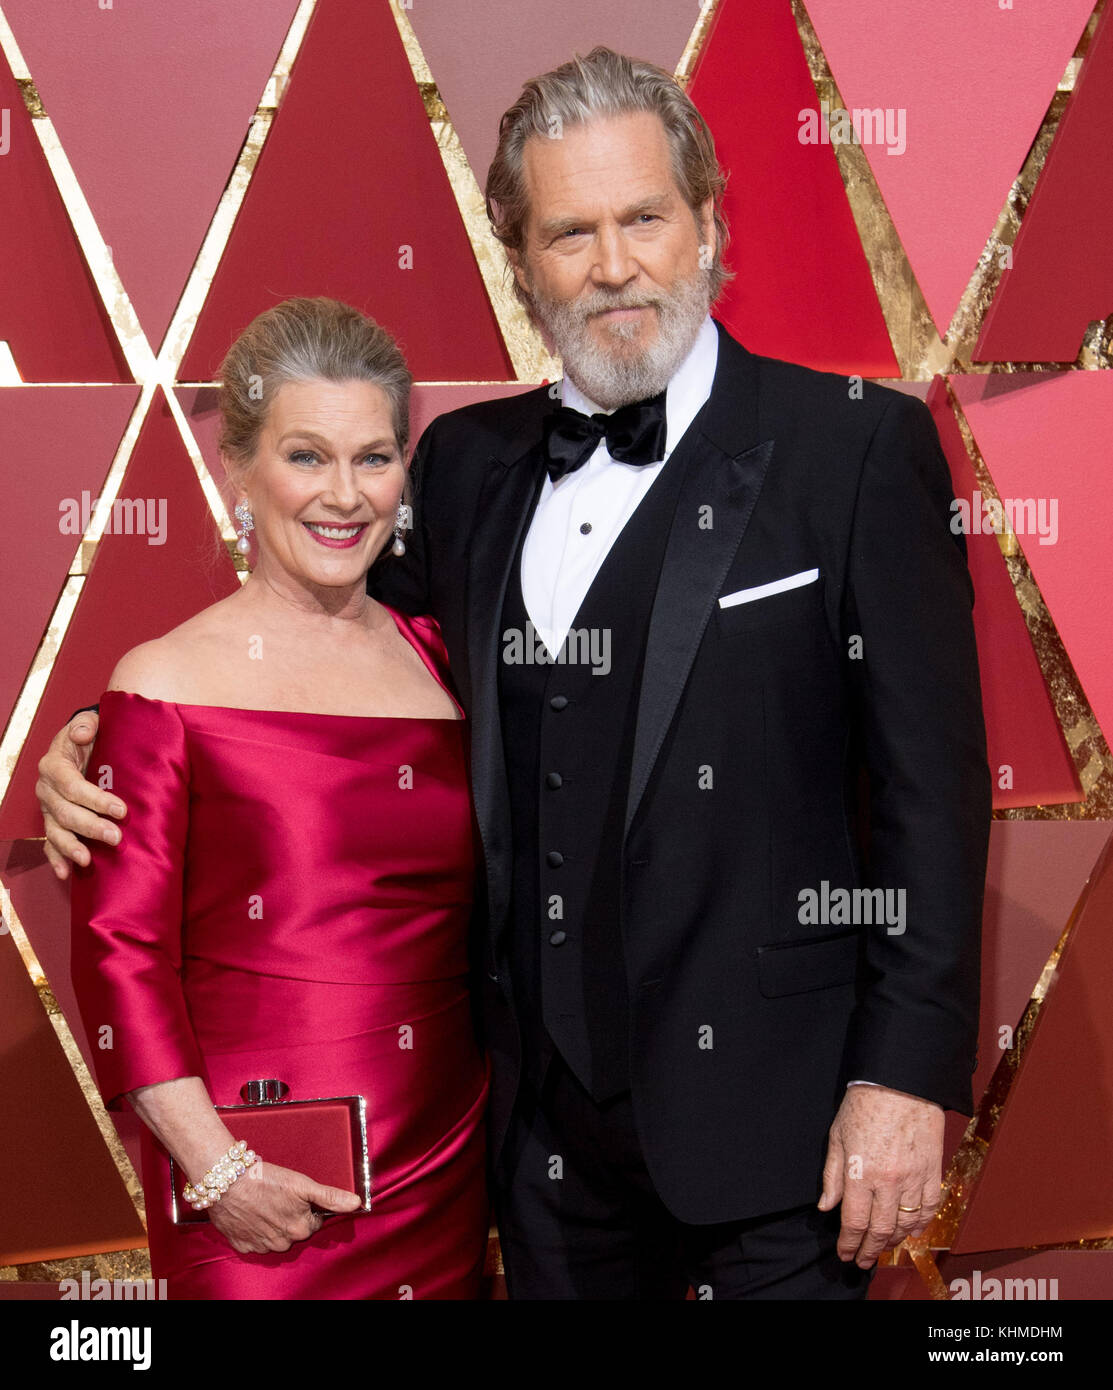 HOLLYWOOD, CA - FEBRUARY 26: Jeff Bridges attends the 89th Annual Academy Awards at Hollywood & Highland Center on February 26, 2017 in Hollywood, California  People:  Jeff Bridges  Transmission Ref:  MNC Stock Photo